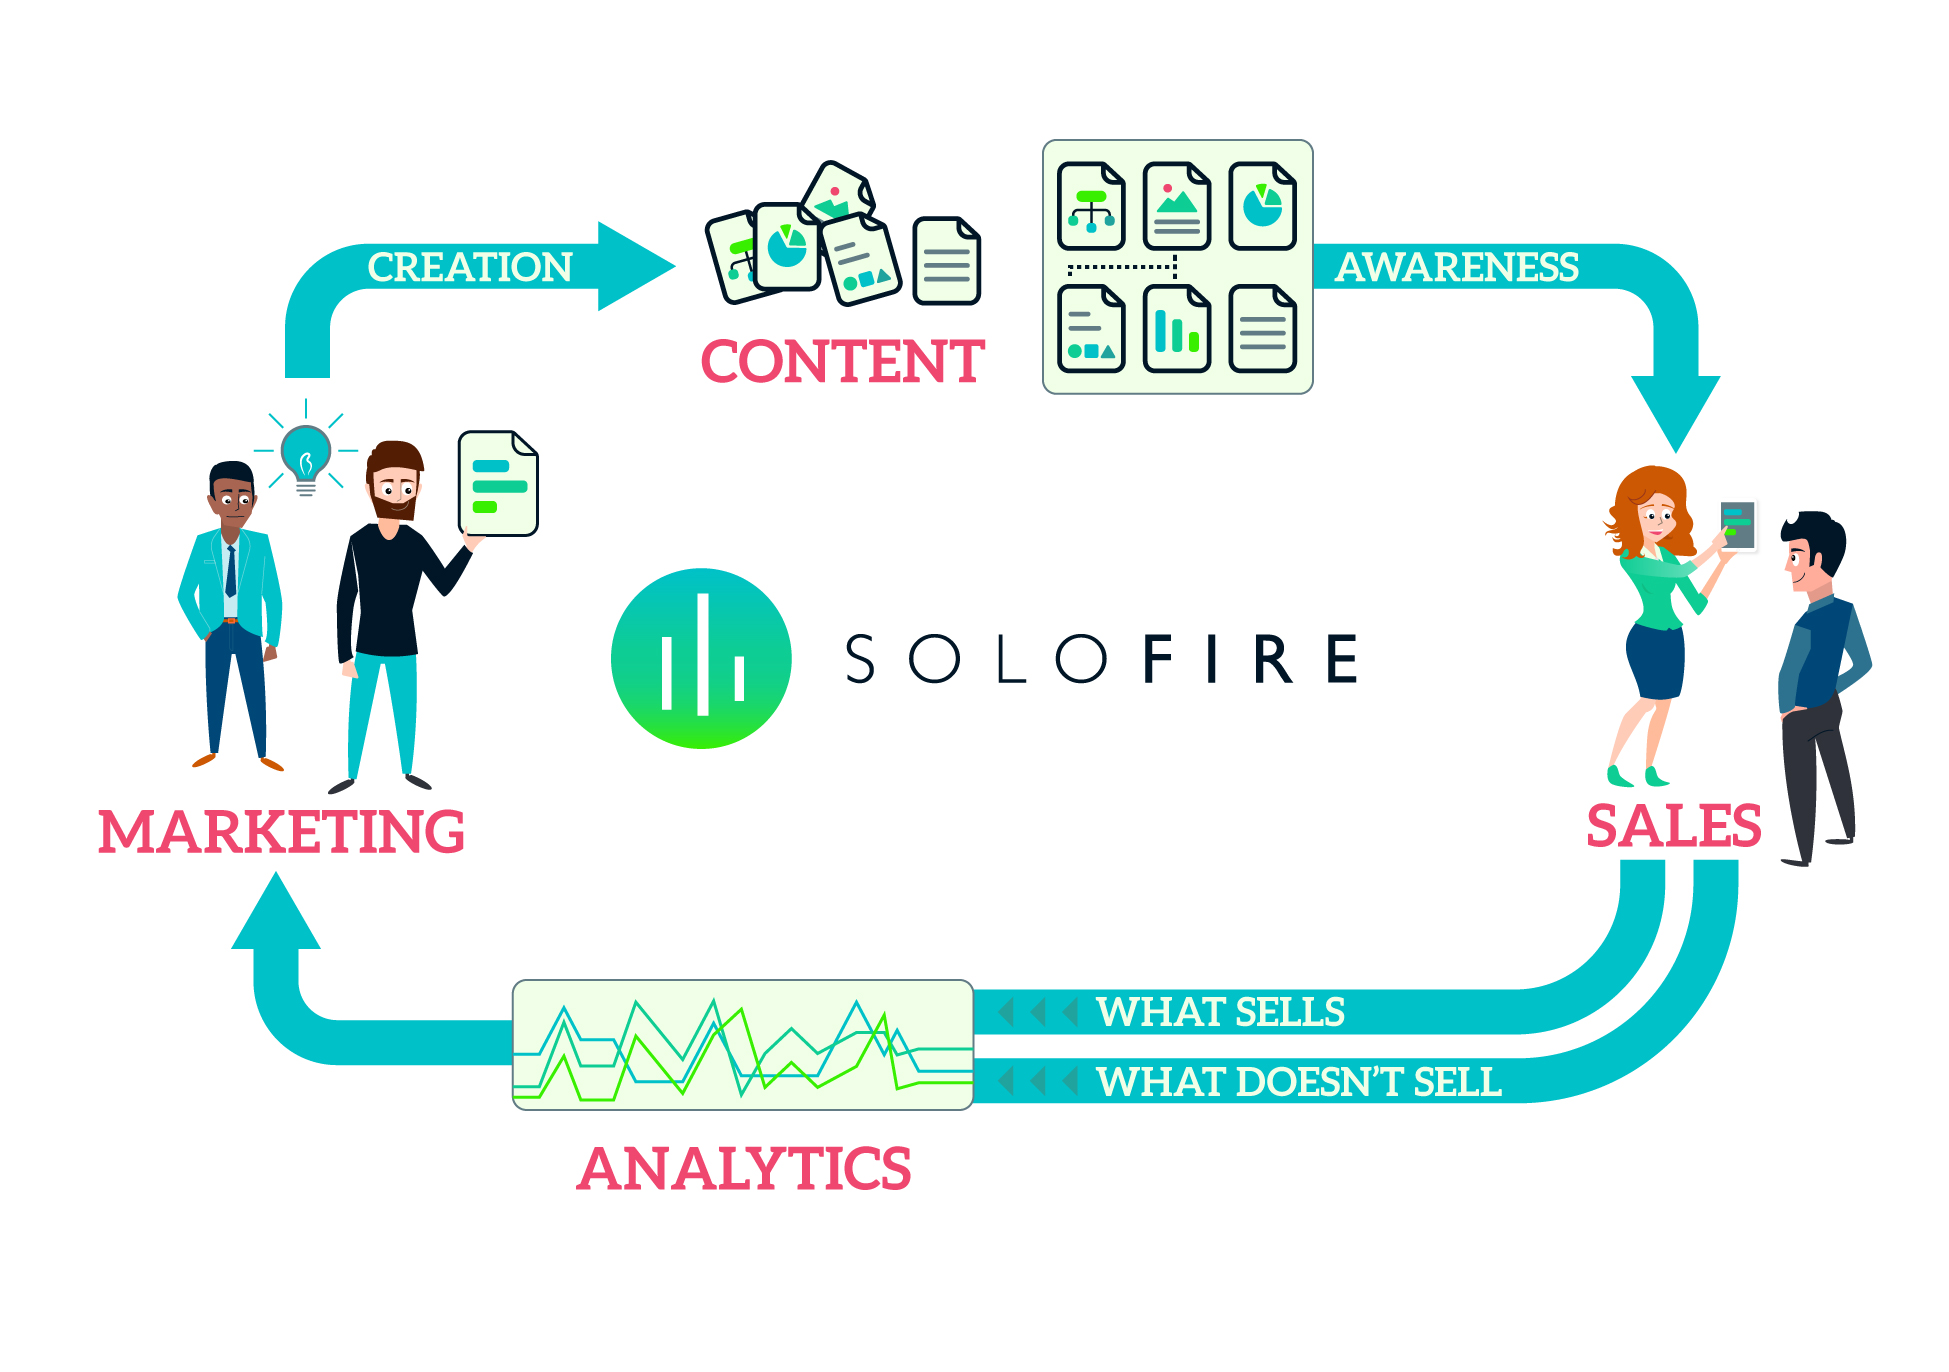 SoloFire helps your teams be content aware